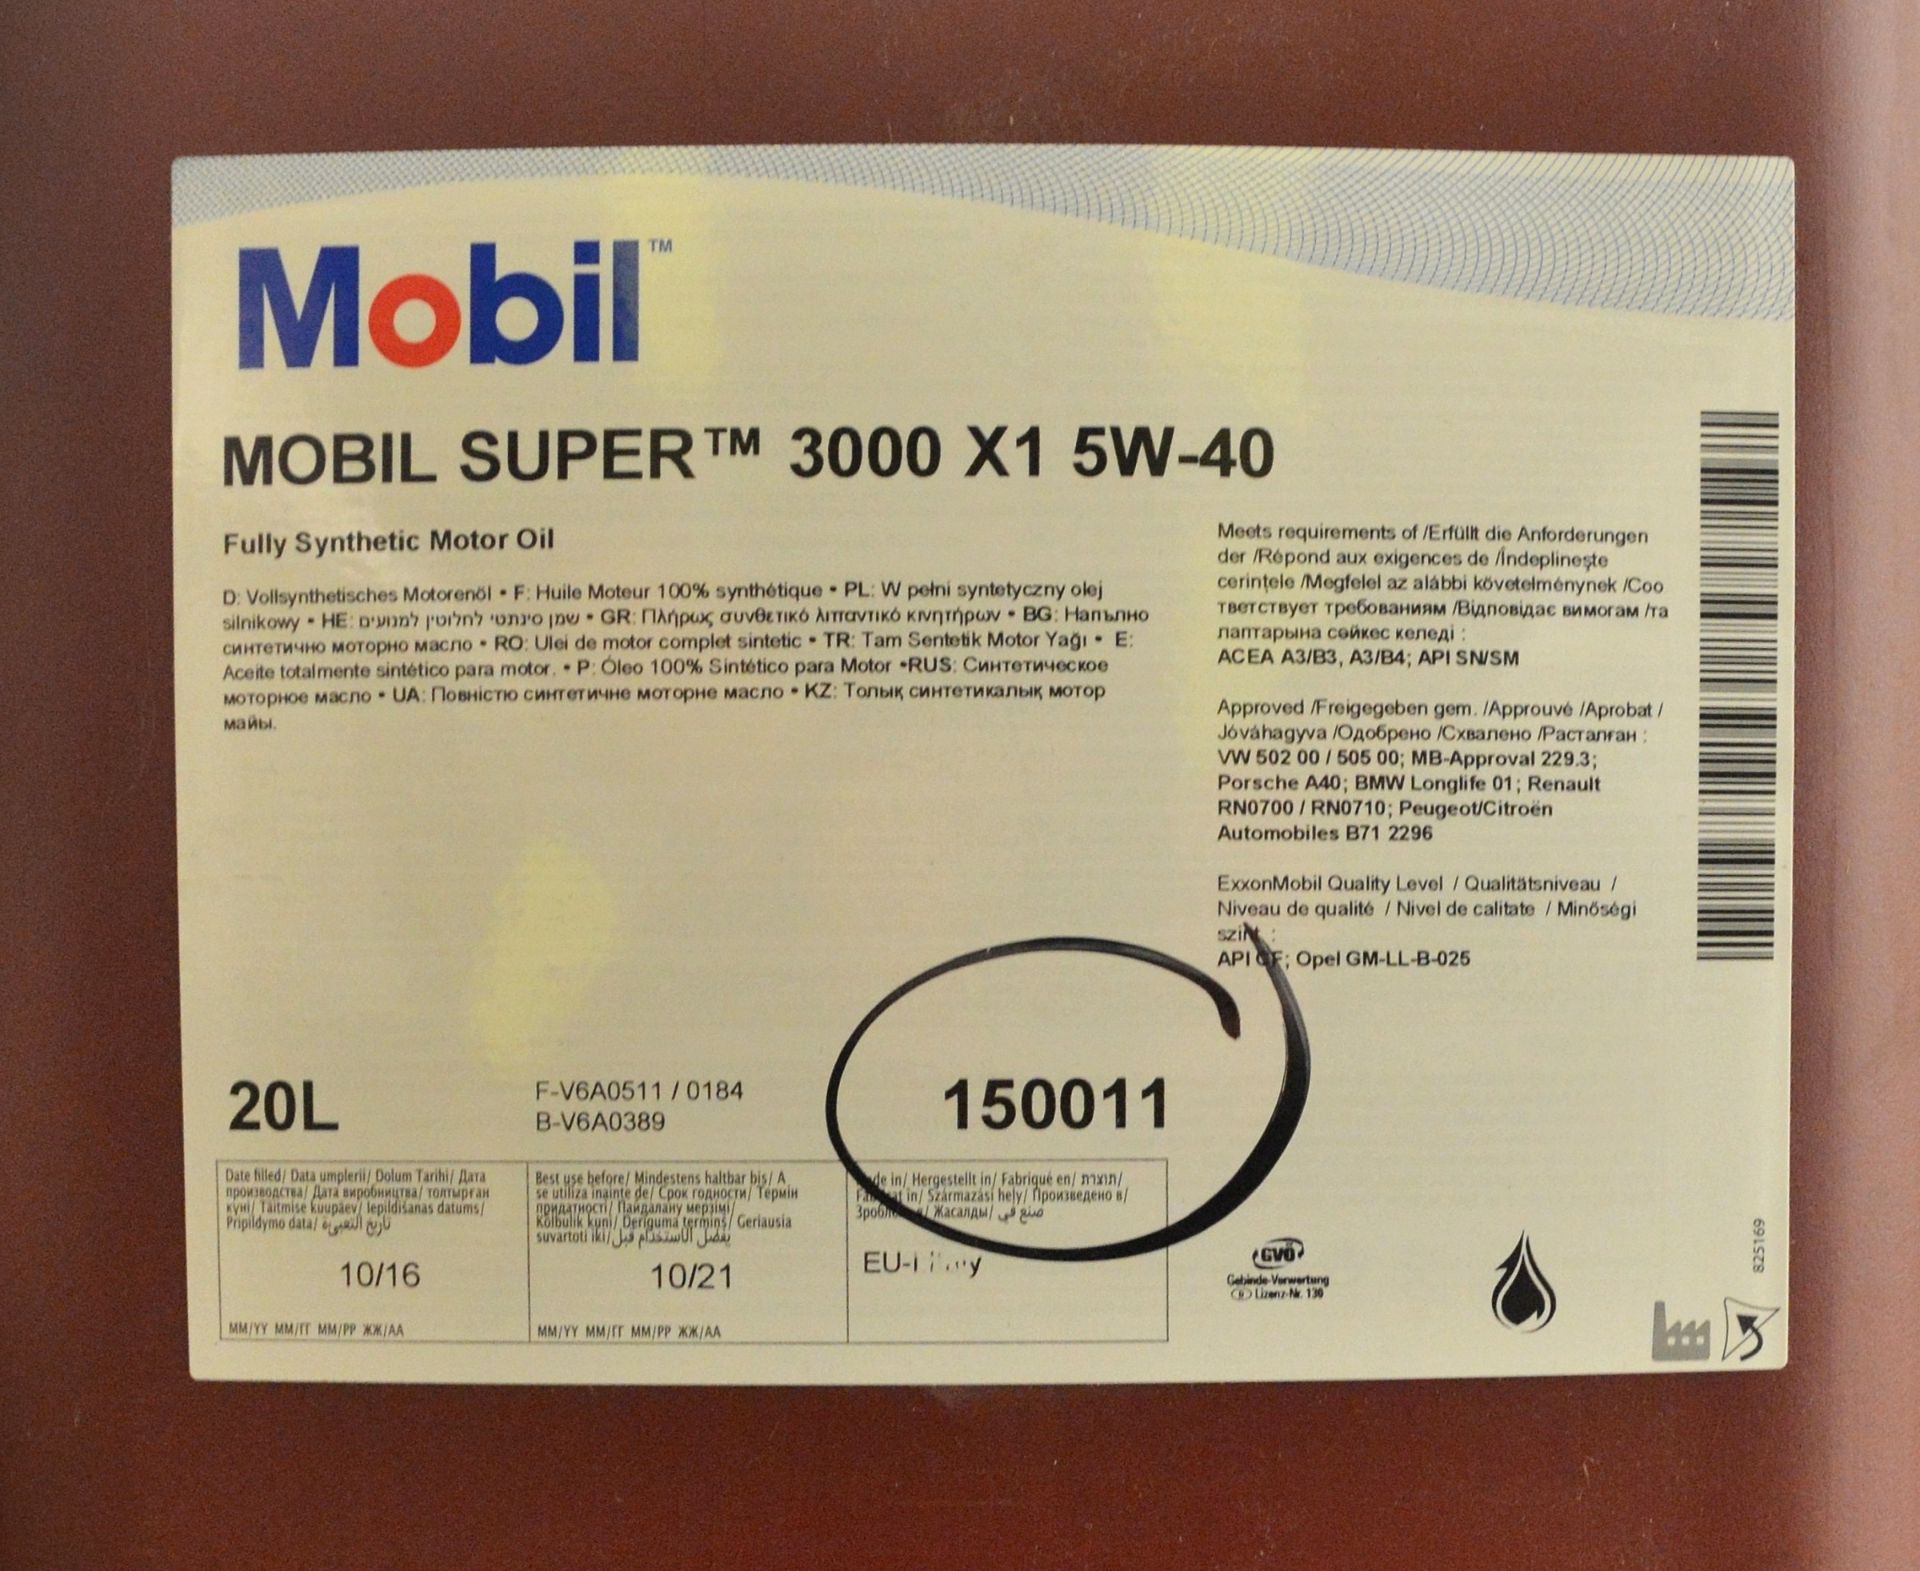 20L Mobil Super 3000 X1 5W-40 Fully Synthetic Motor Oil - Image 2 of 2